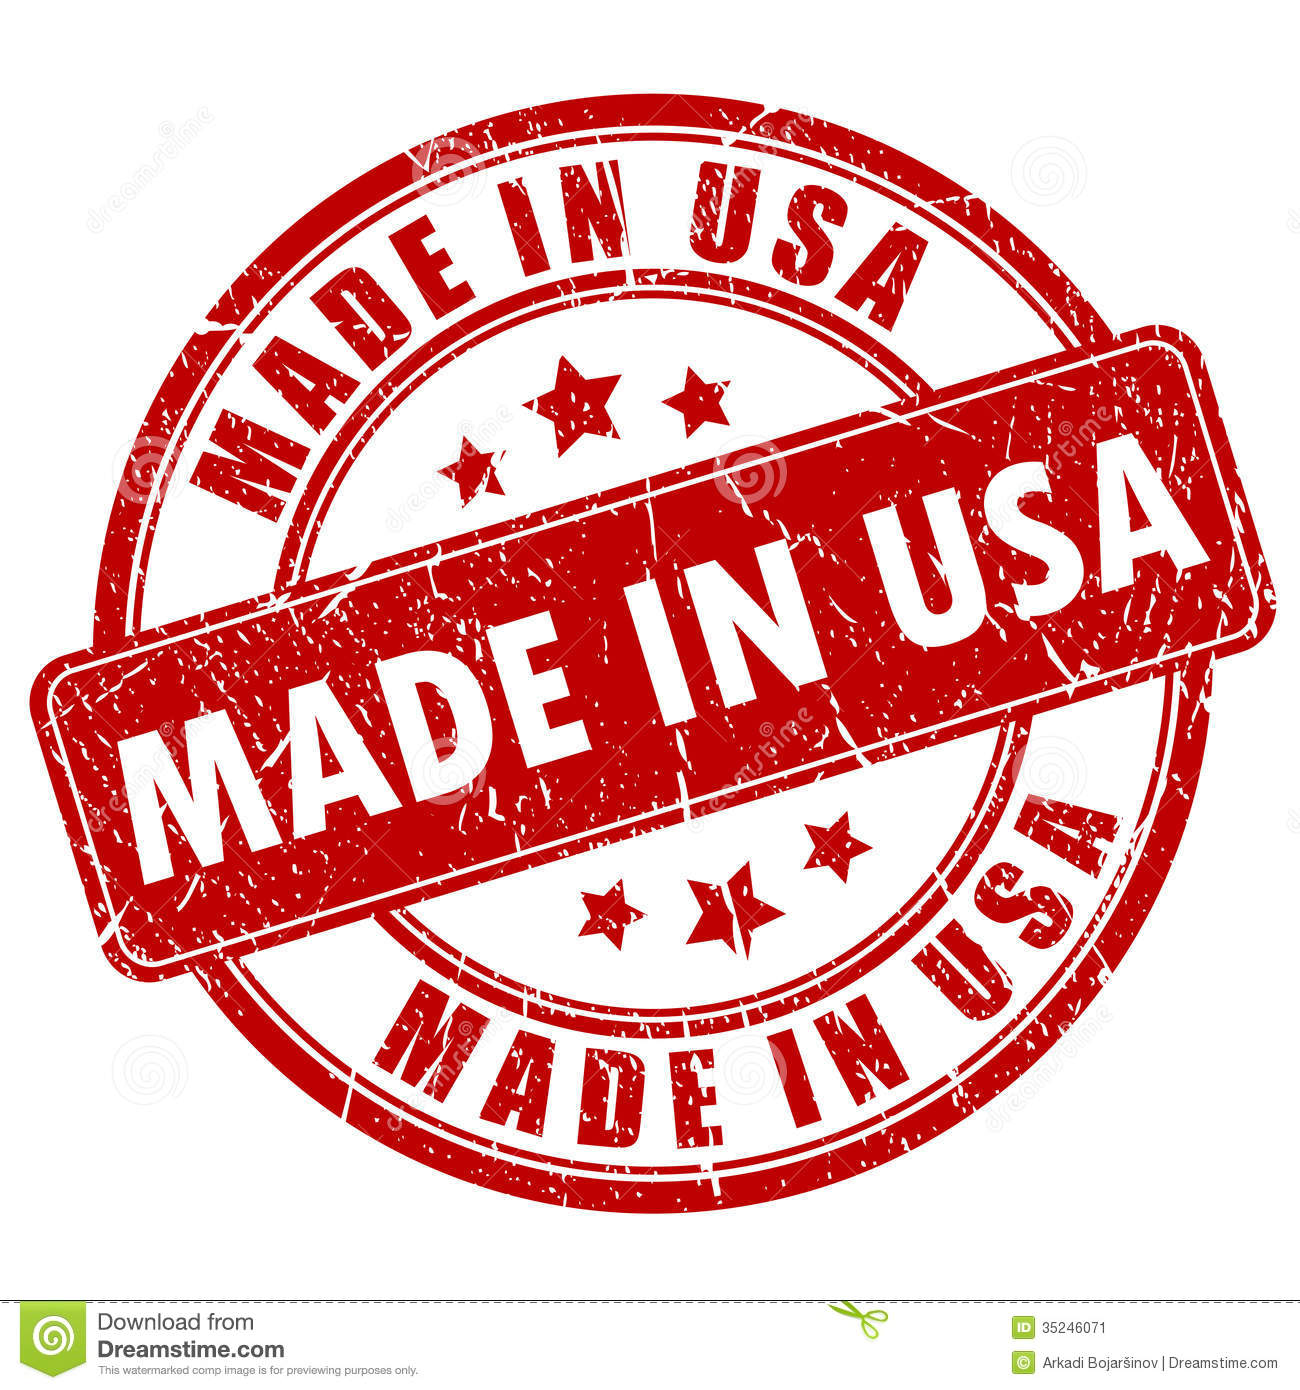 Made In Usa Stamp Stock Image   Image  35246071